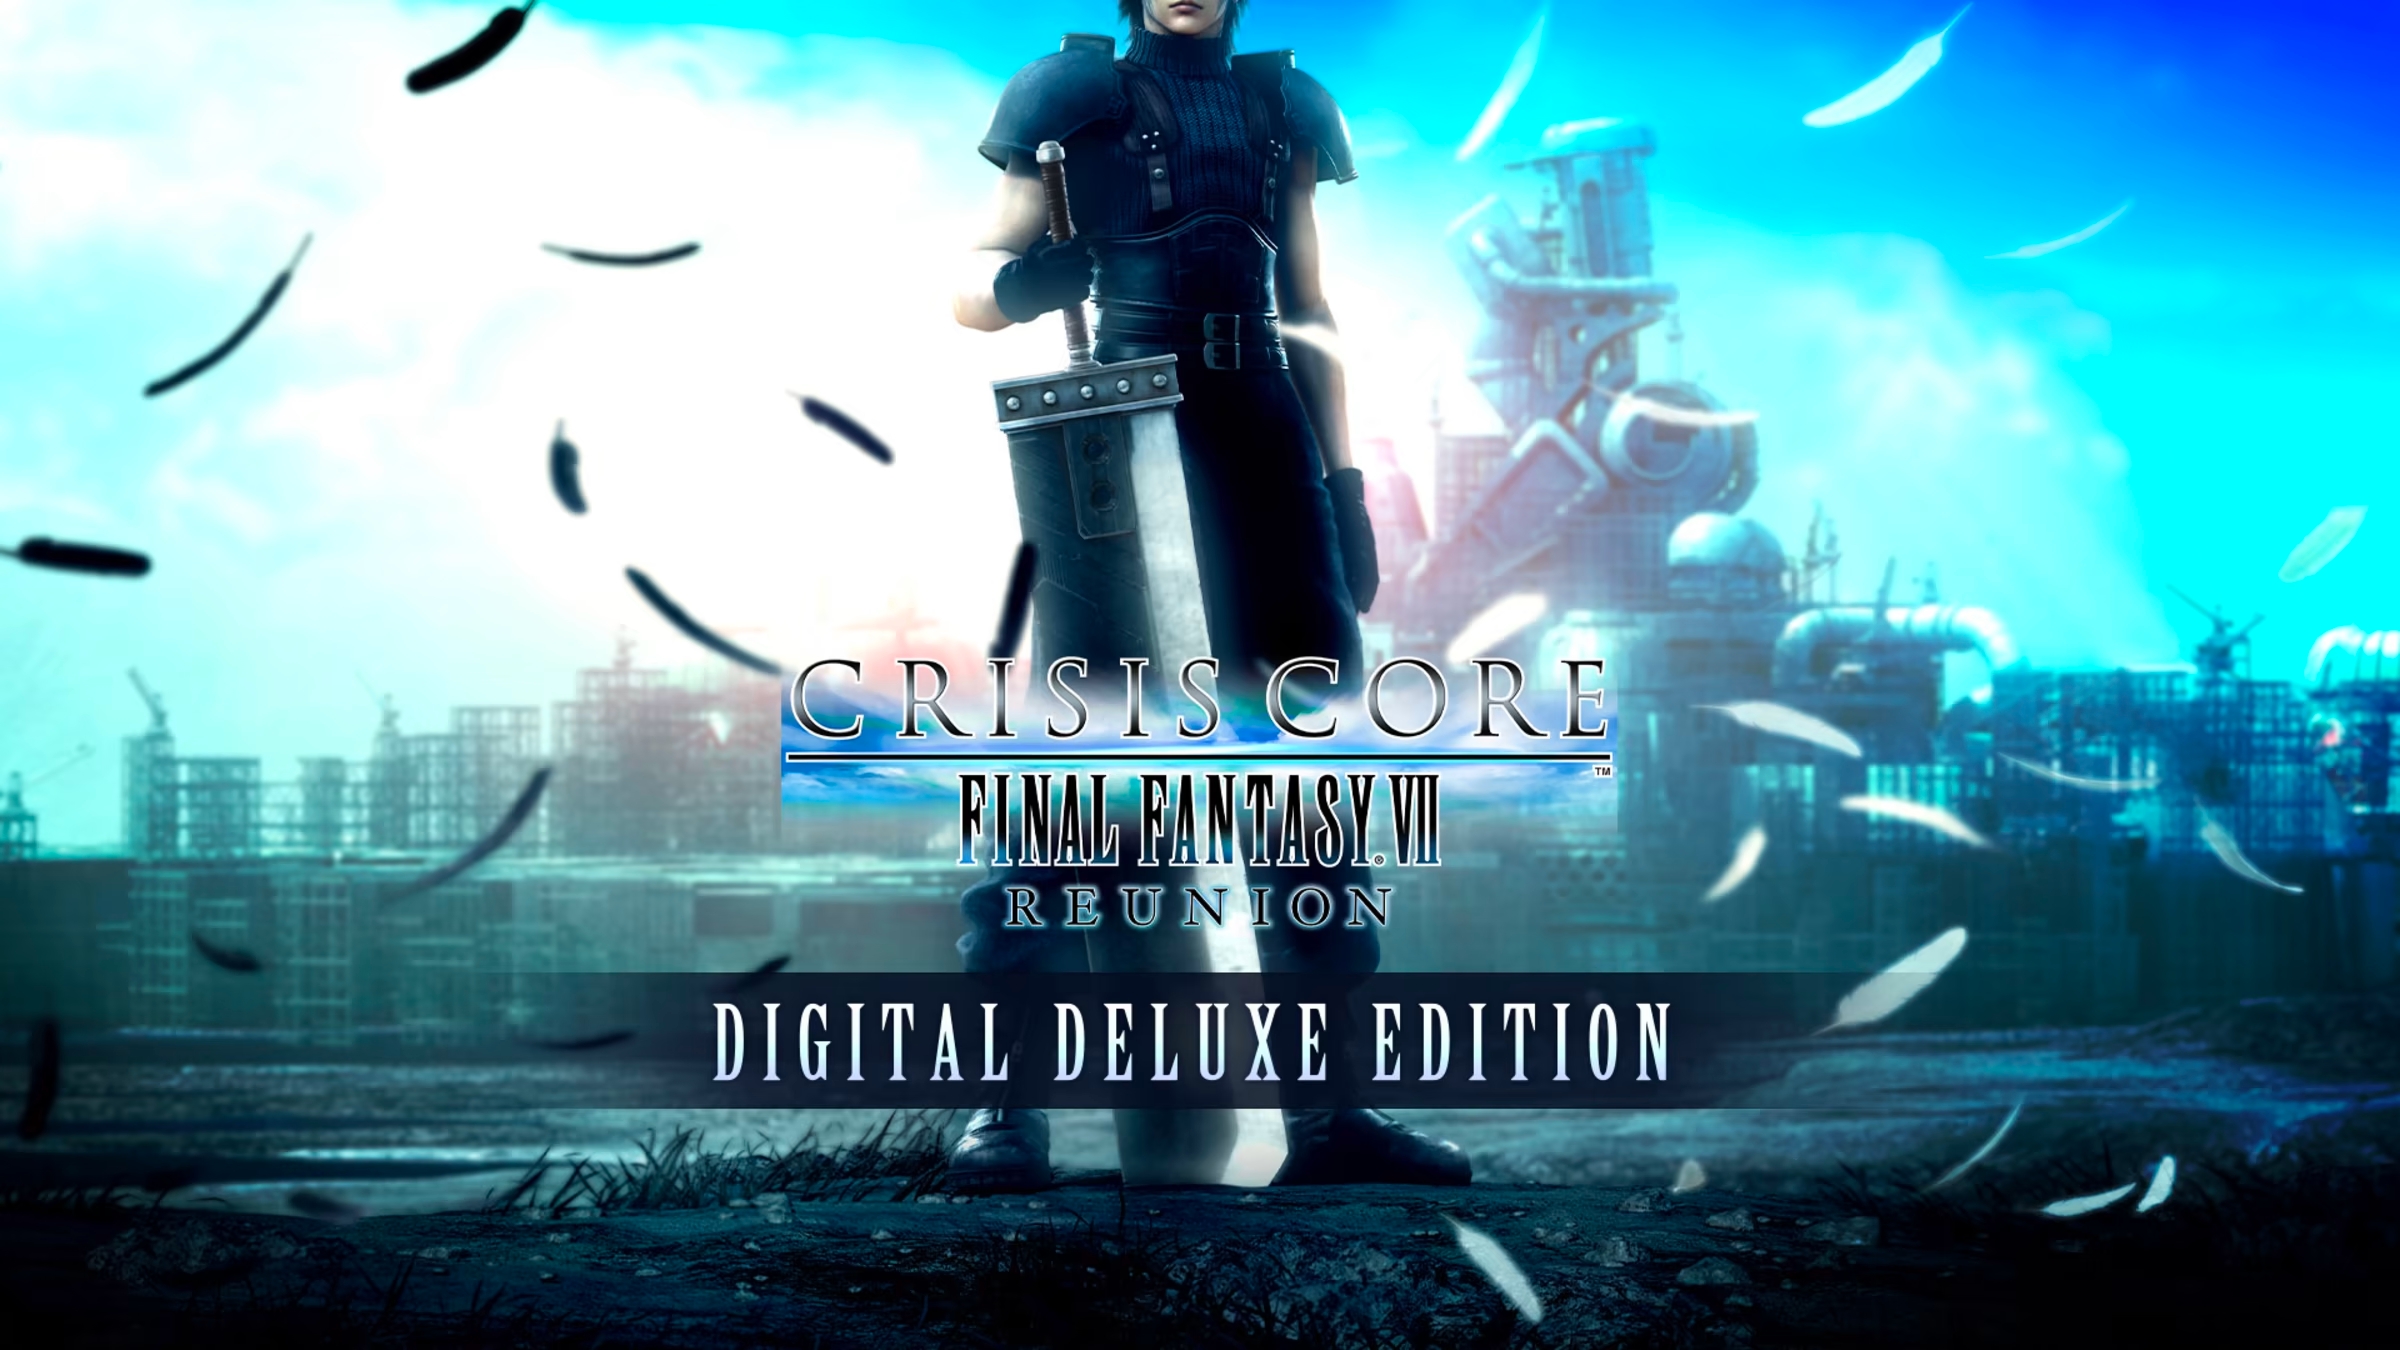 https://gaming-cdn.com/images/products/13277/orig/crisis-core-final-fantasy-vii-reunion-digital-deluxe-edition-digital-deluxe-edition-pc-game-steam-europe-cover.jpg?v=1671534171